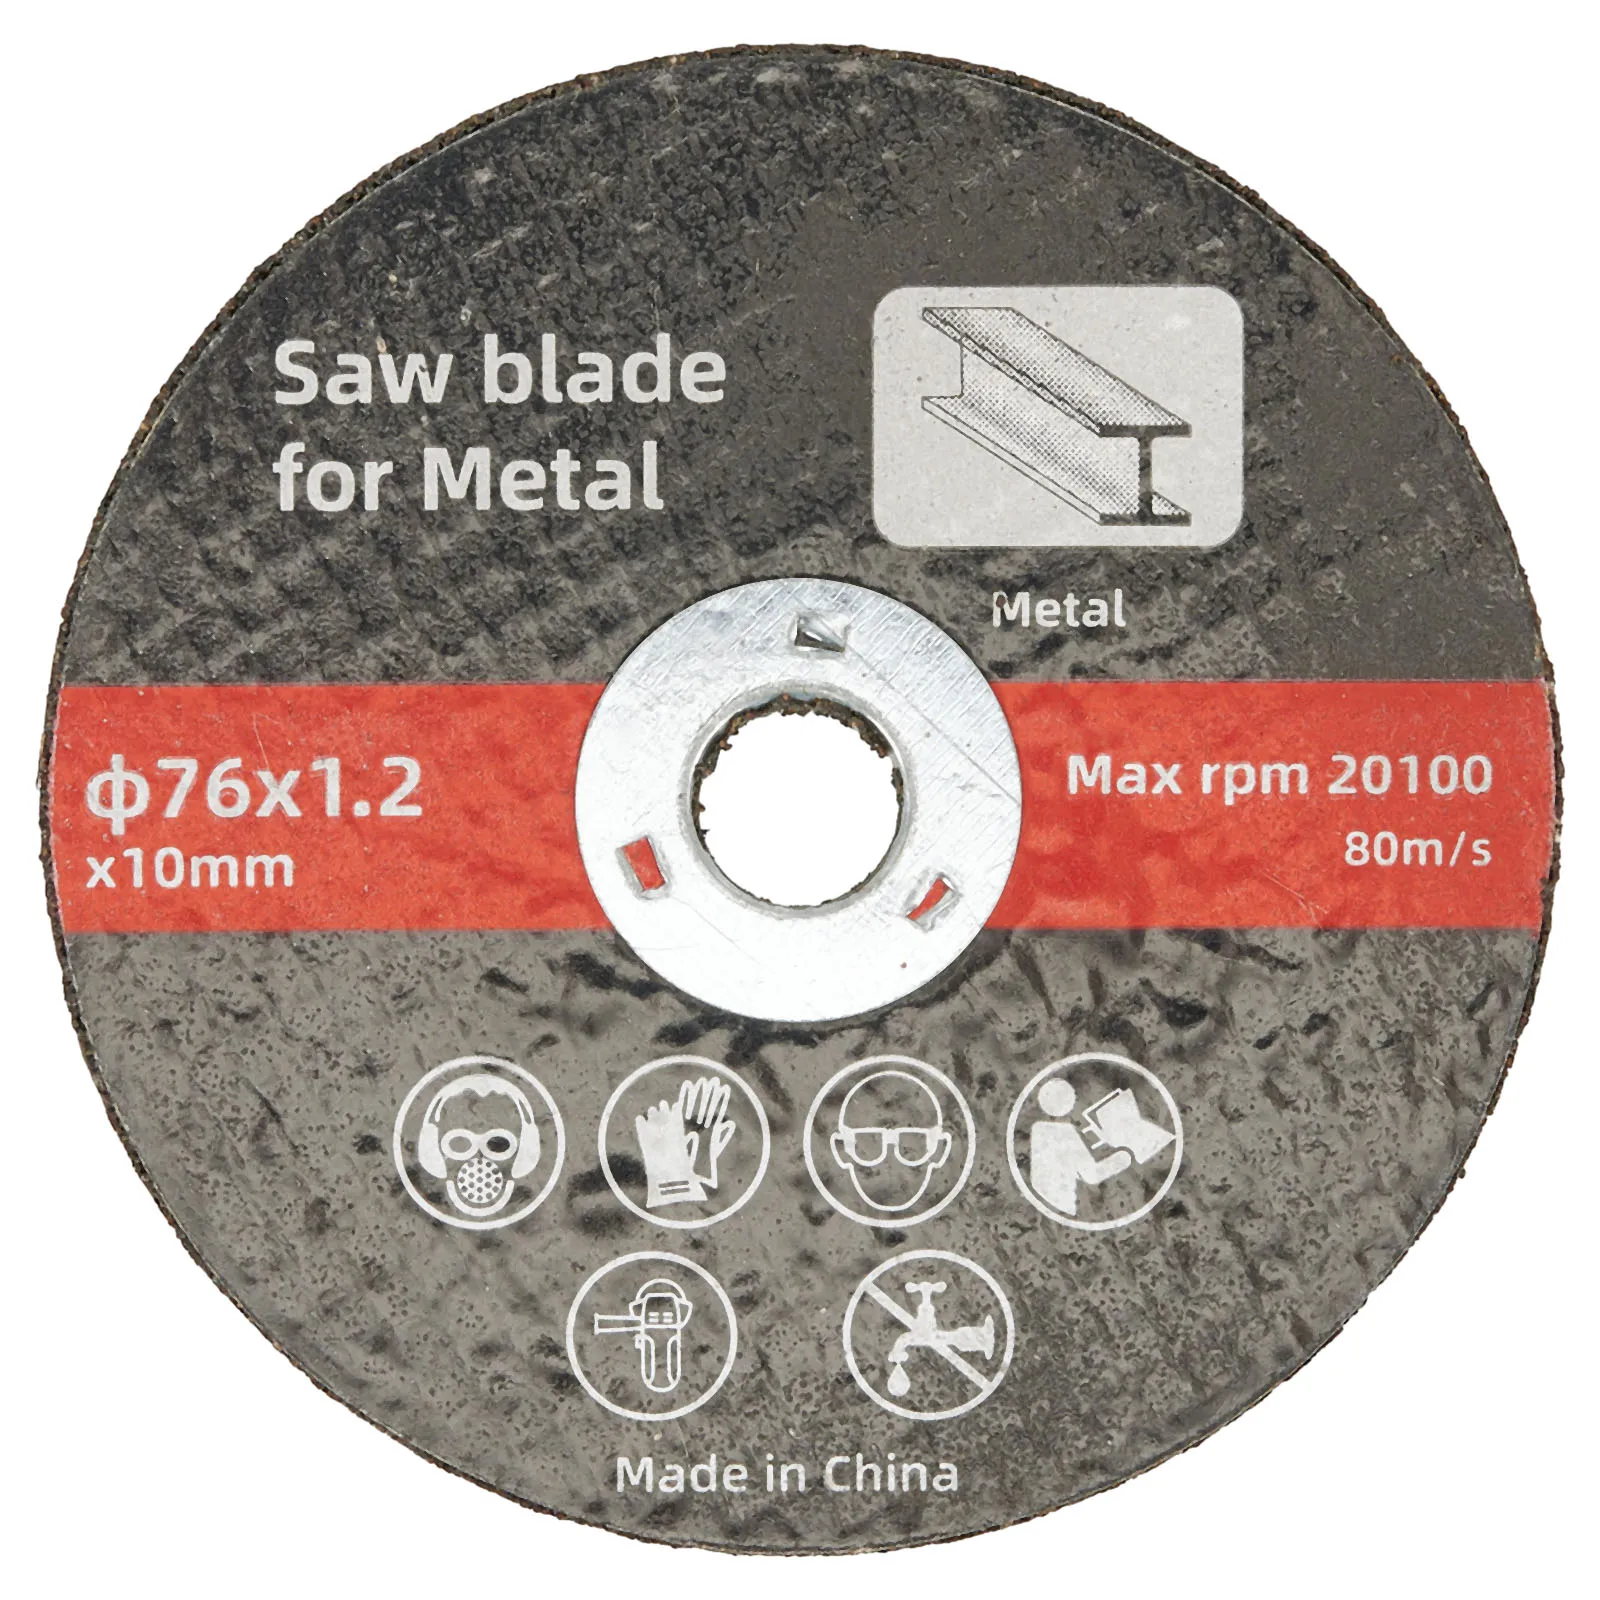 

1PC 76mm X 1.2mm X 10mm Resin Grinding Cut Off Wheels Cutting Disc Circular Saw Blade For Die Angle Grinder Cutting Wheel